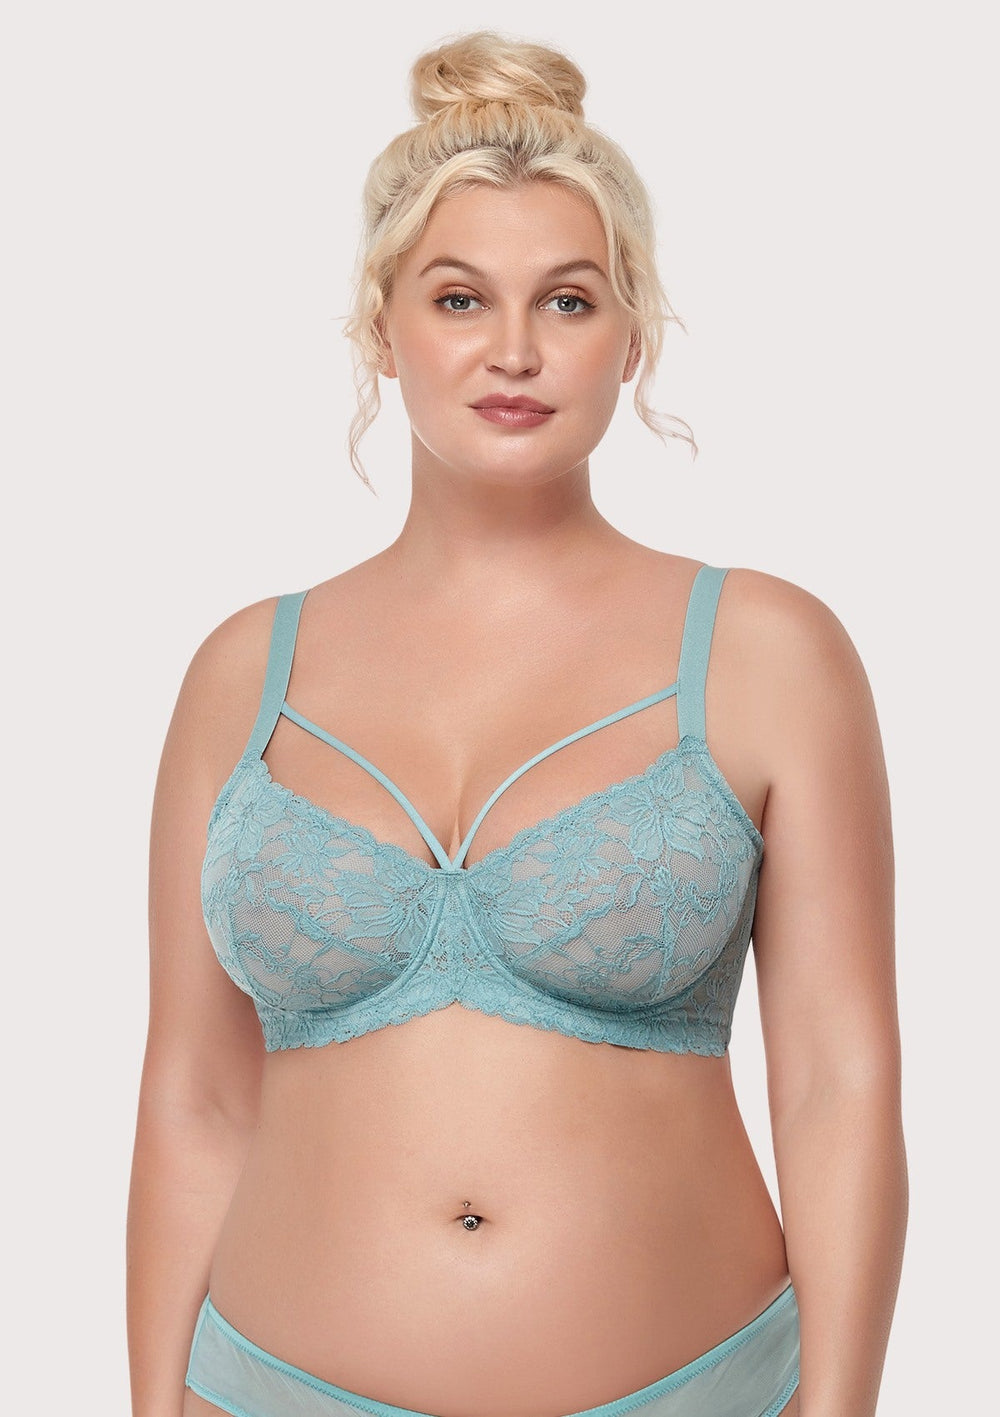 NEW ARRIVALS 32I, Bras for Large Breasts